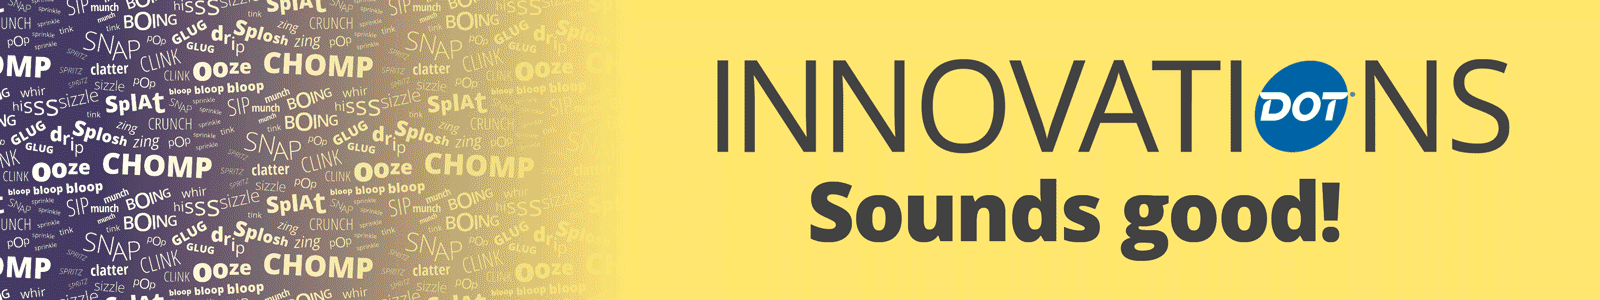 Innovations logo with yellow background and "Sounds good!" text